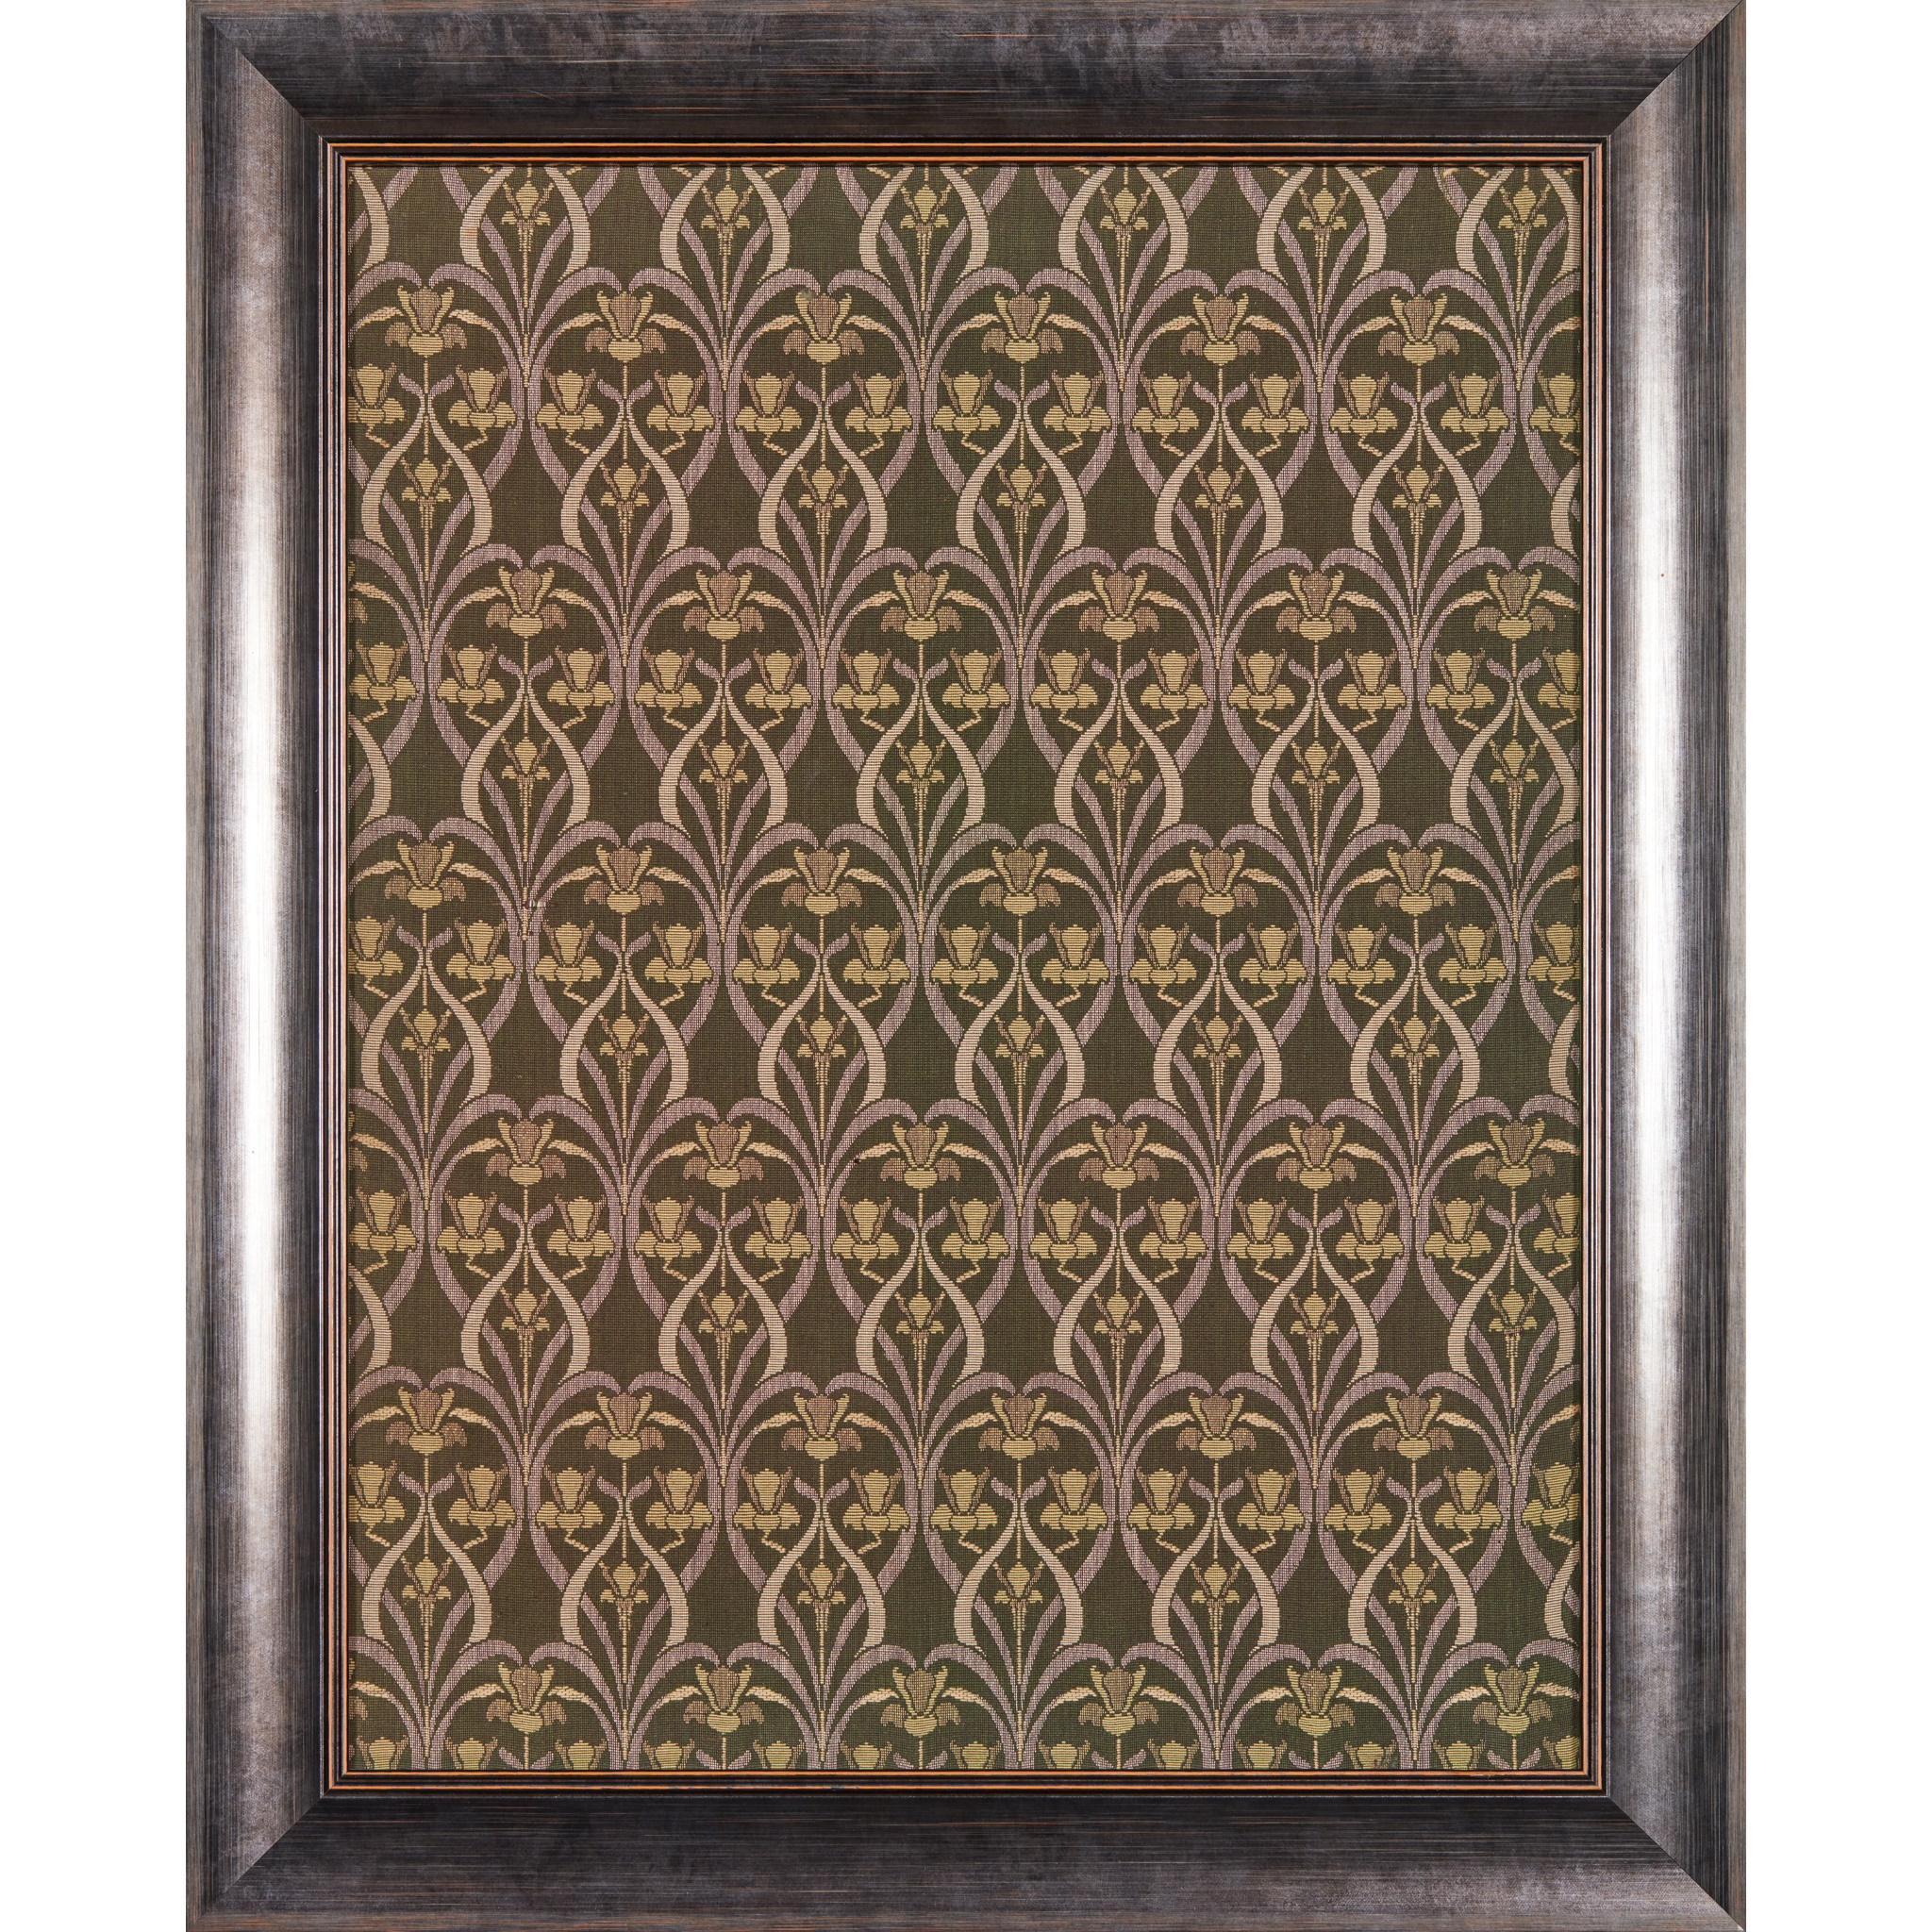 MANNER OF LEWIS FOREMAN DAY FRAMED FABRIC PANEL, CIRCA 1900 - Image 2 of 3